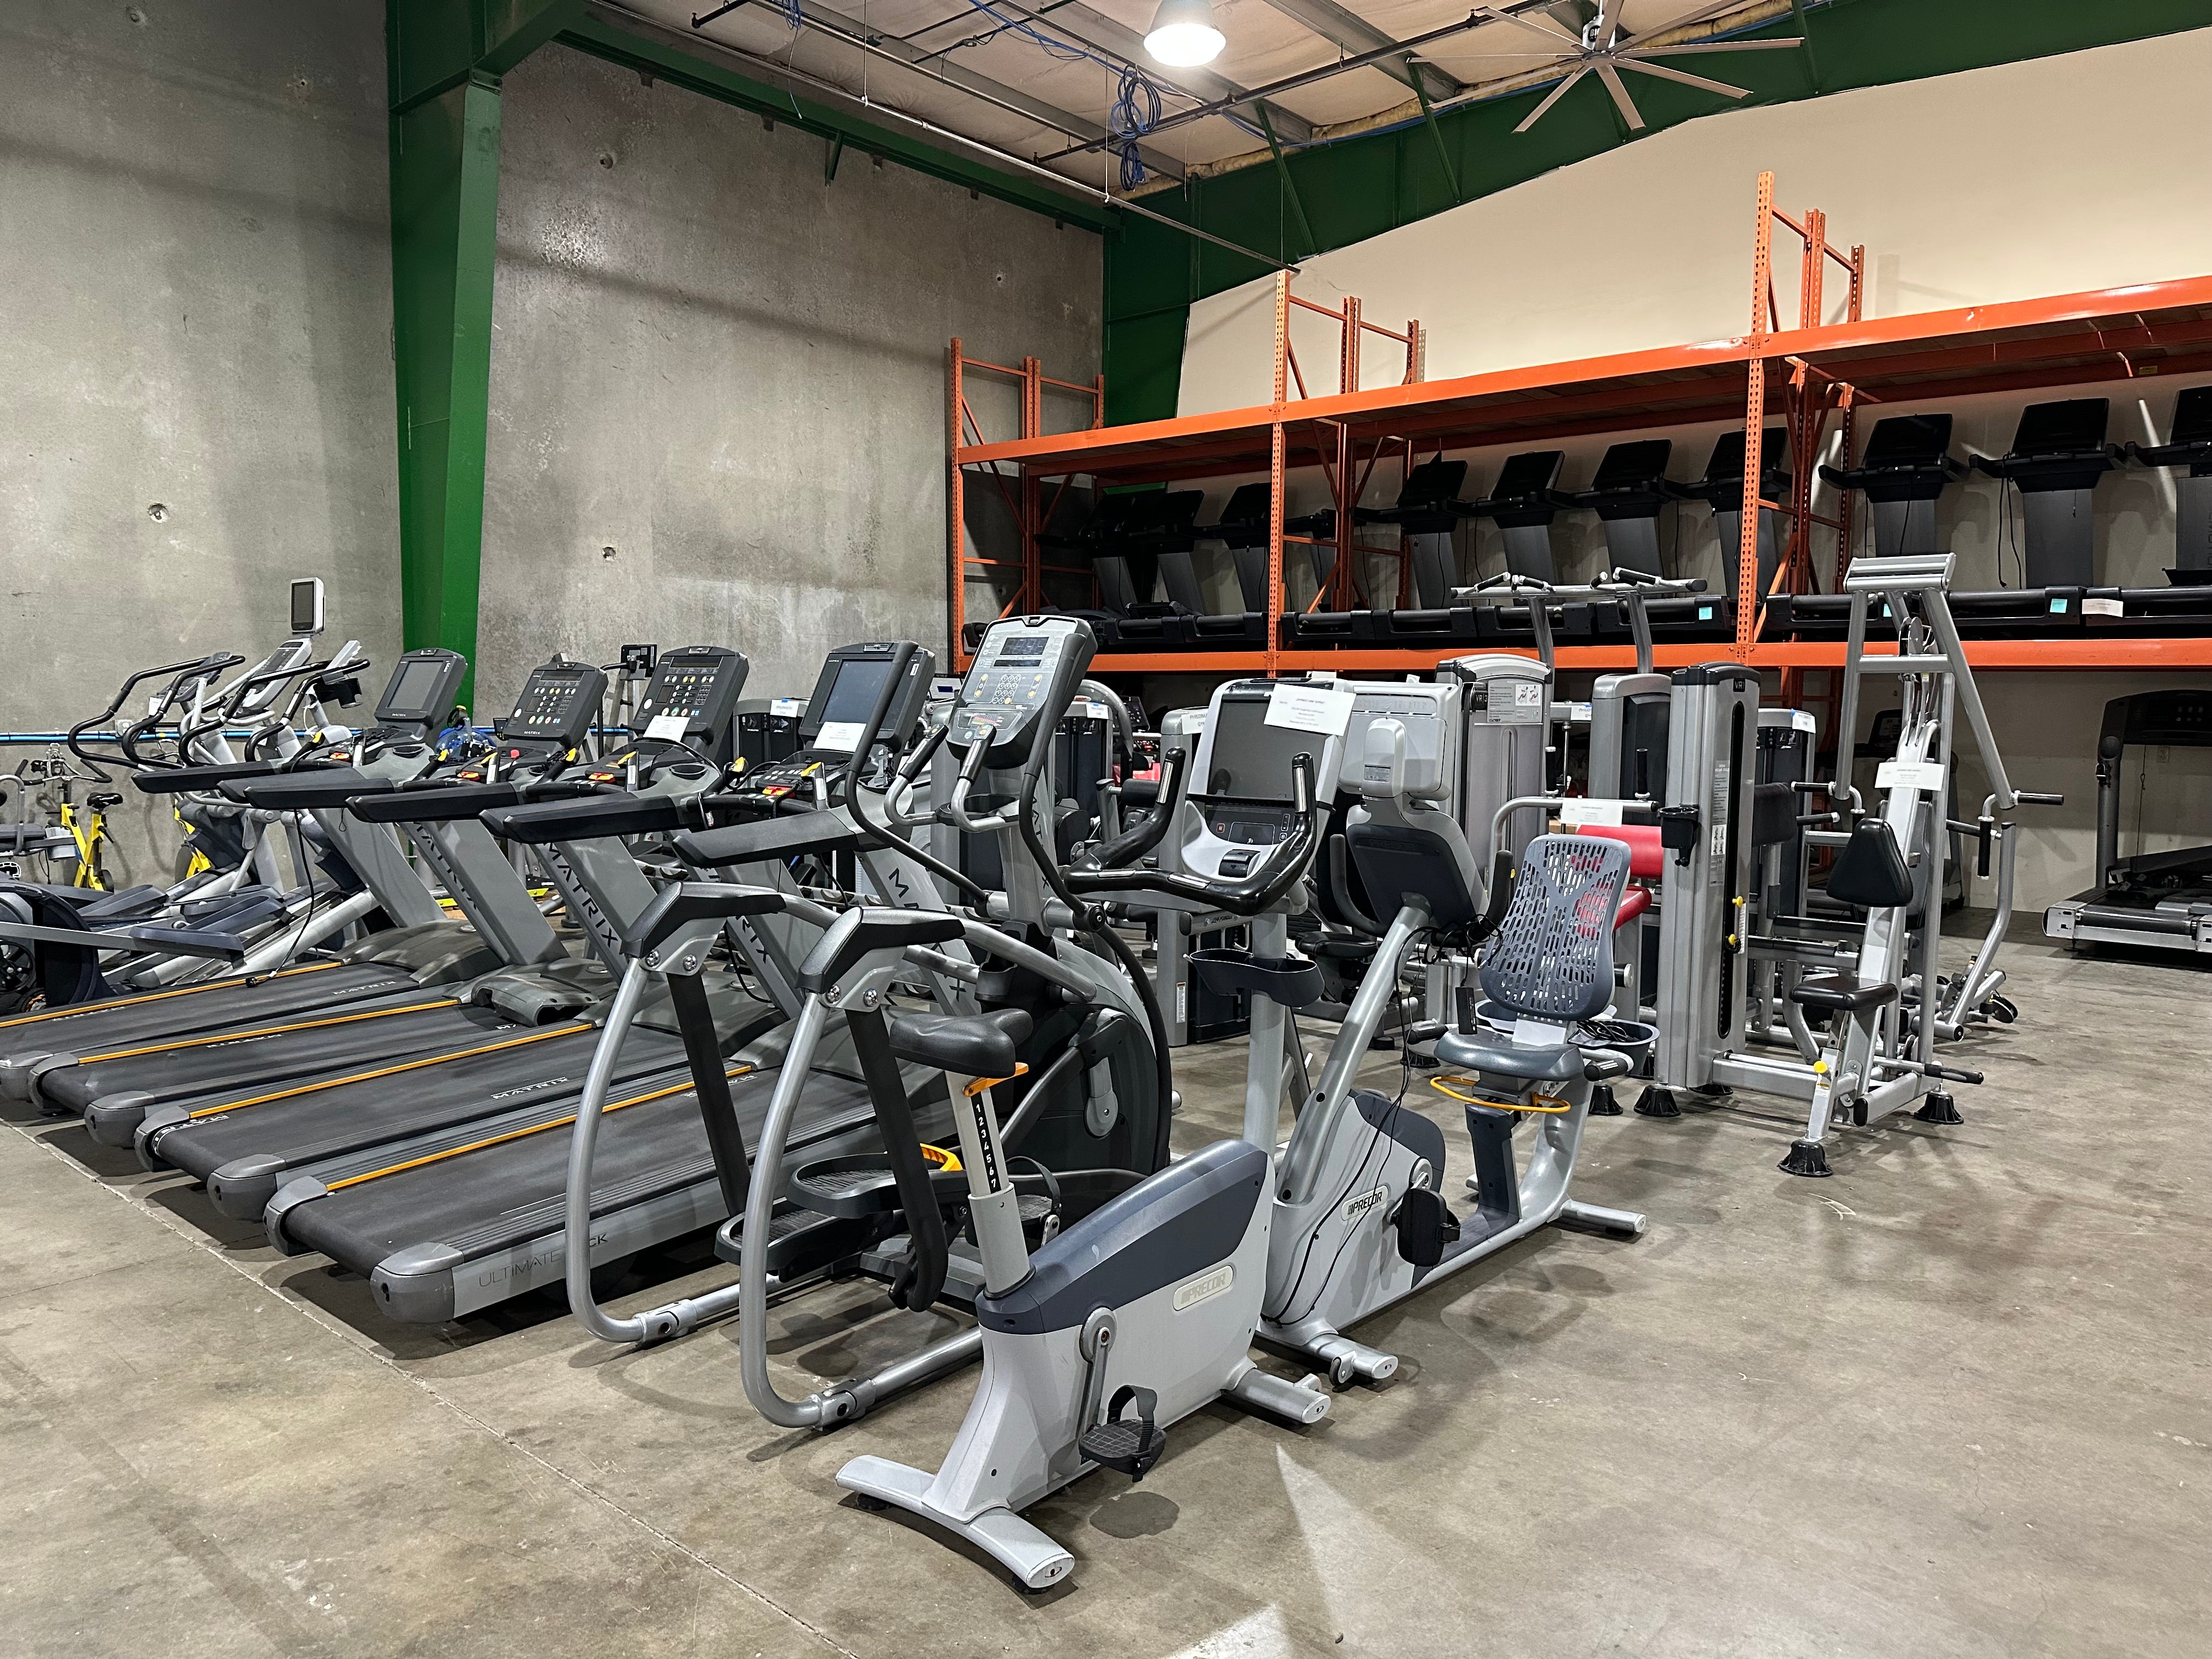 Used Fitness Equipment in a Warehouse